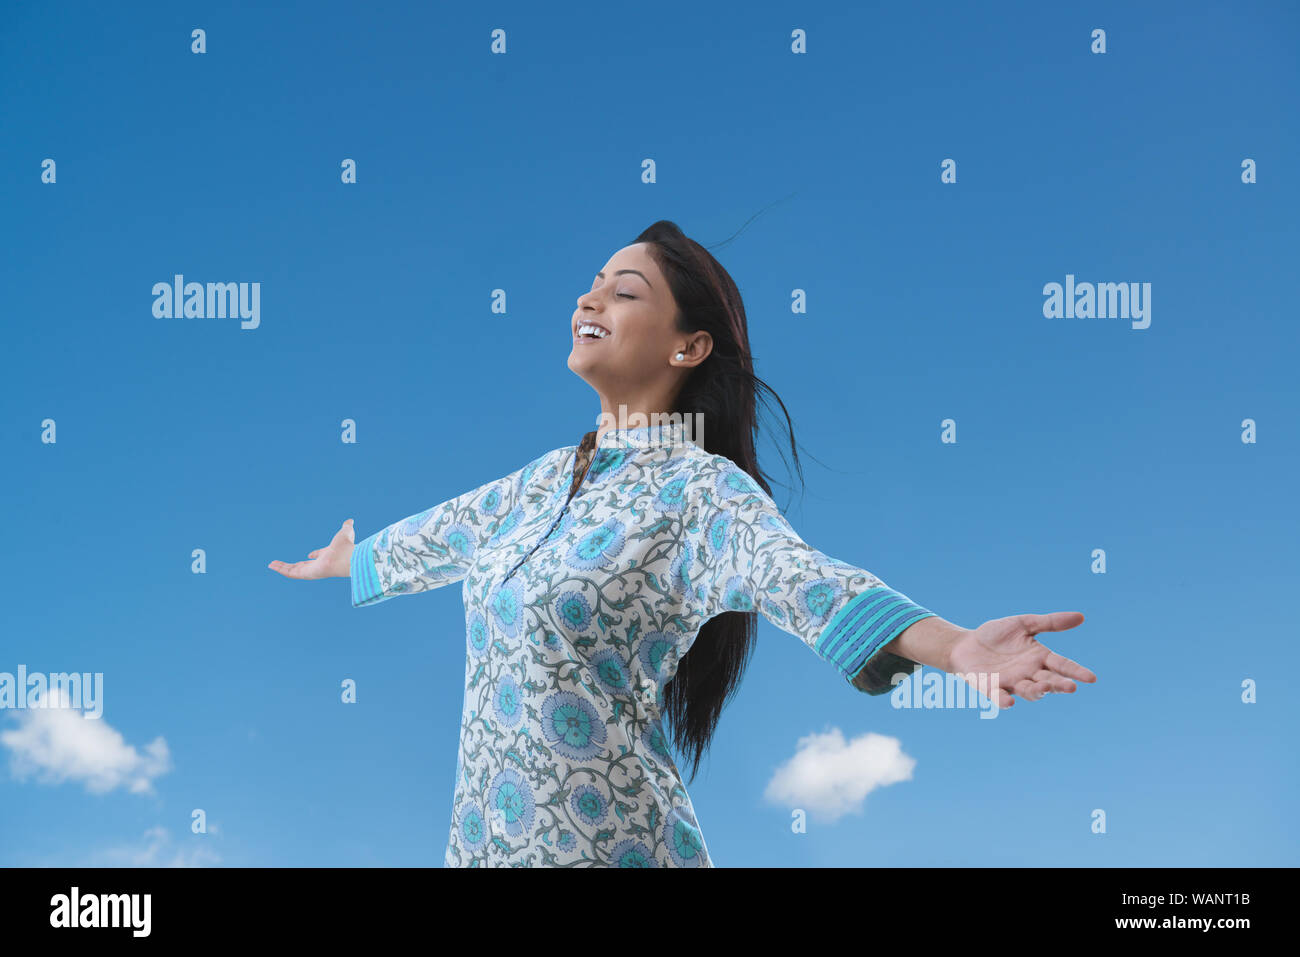 Young woman standing with her arm outstretched Stock Photo